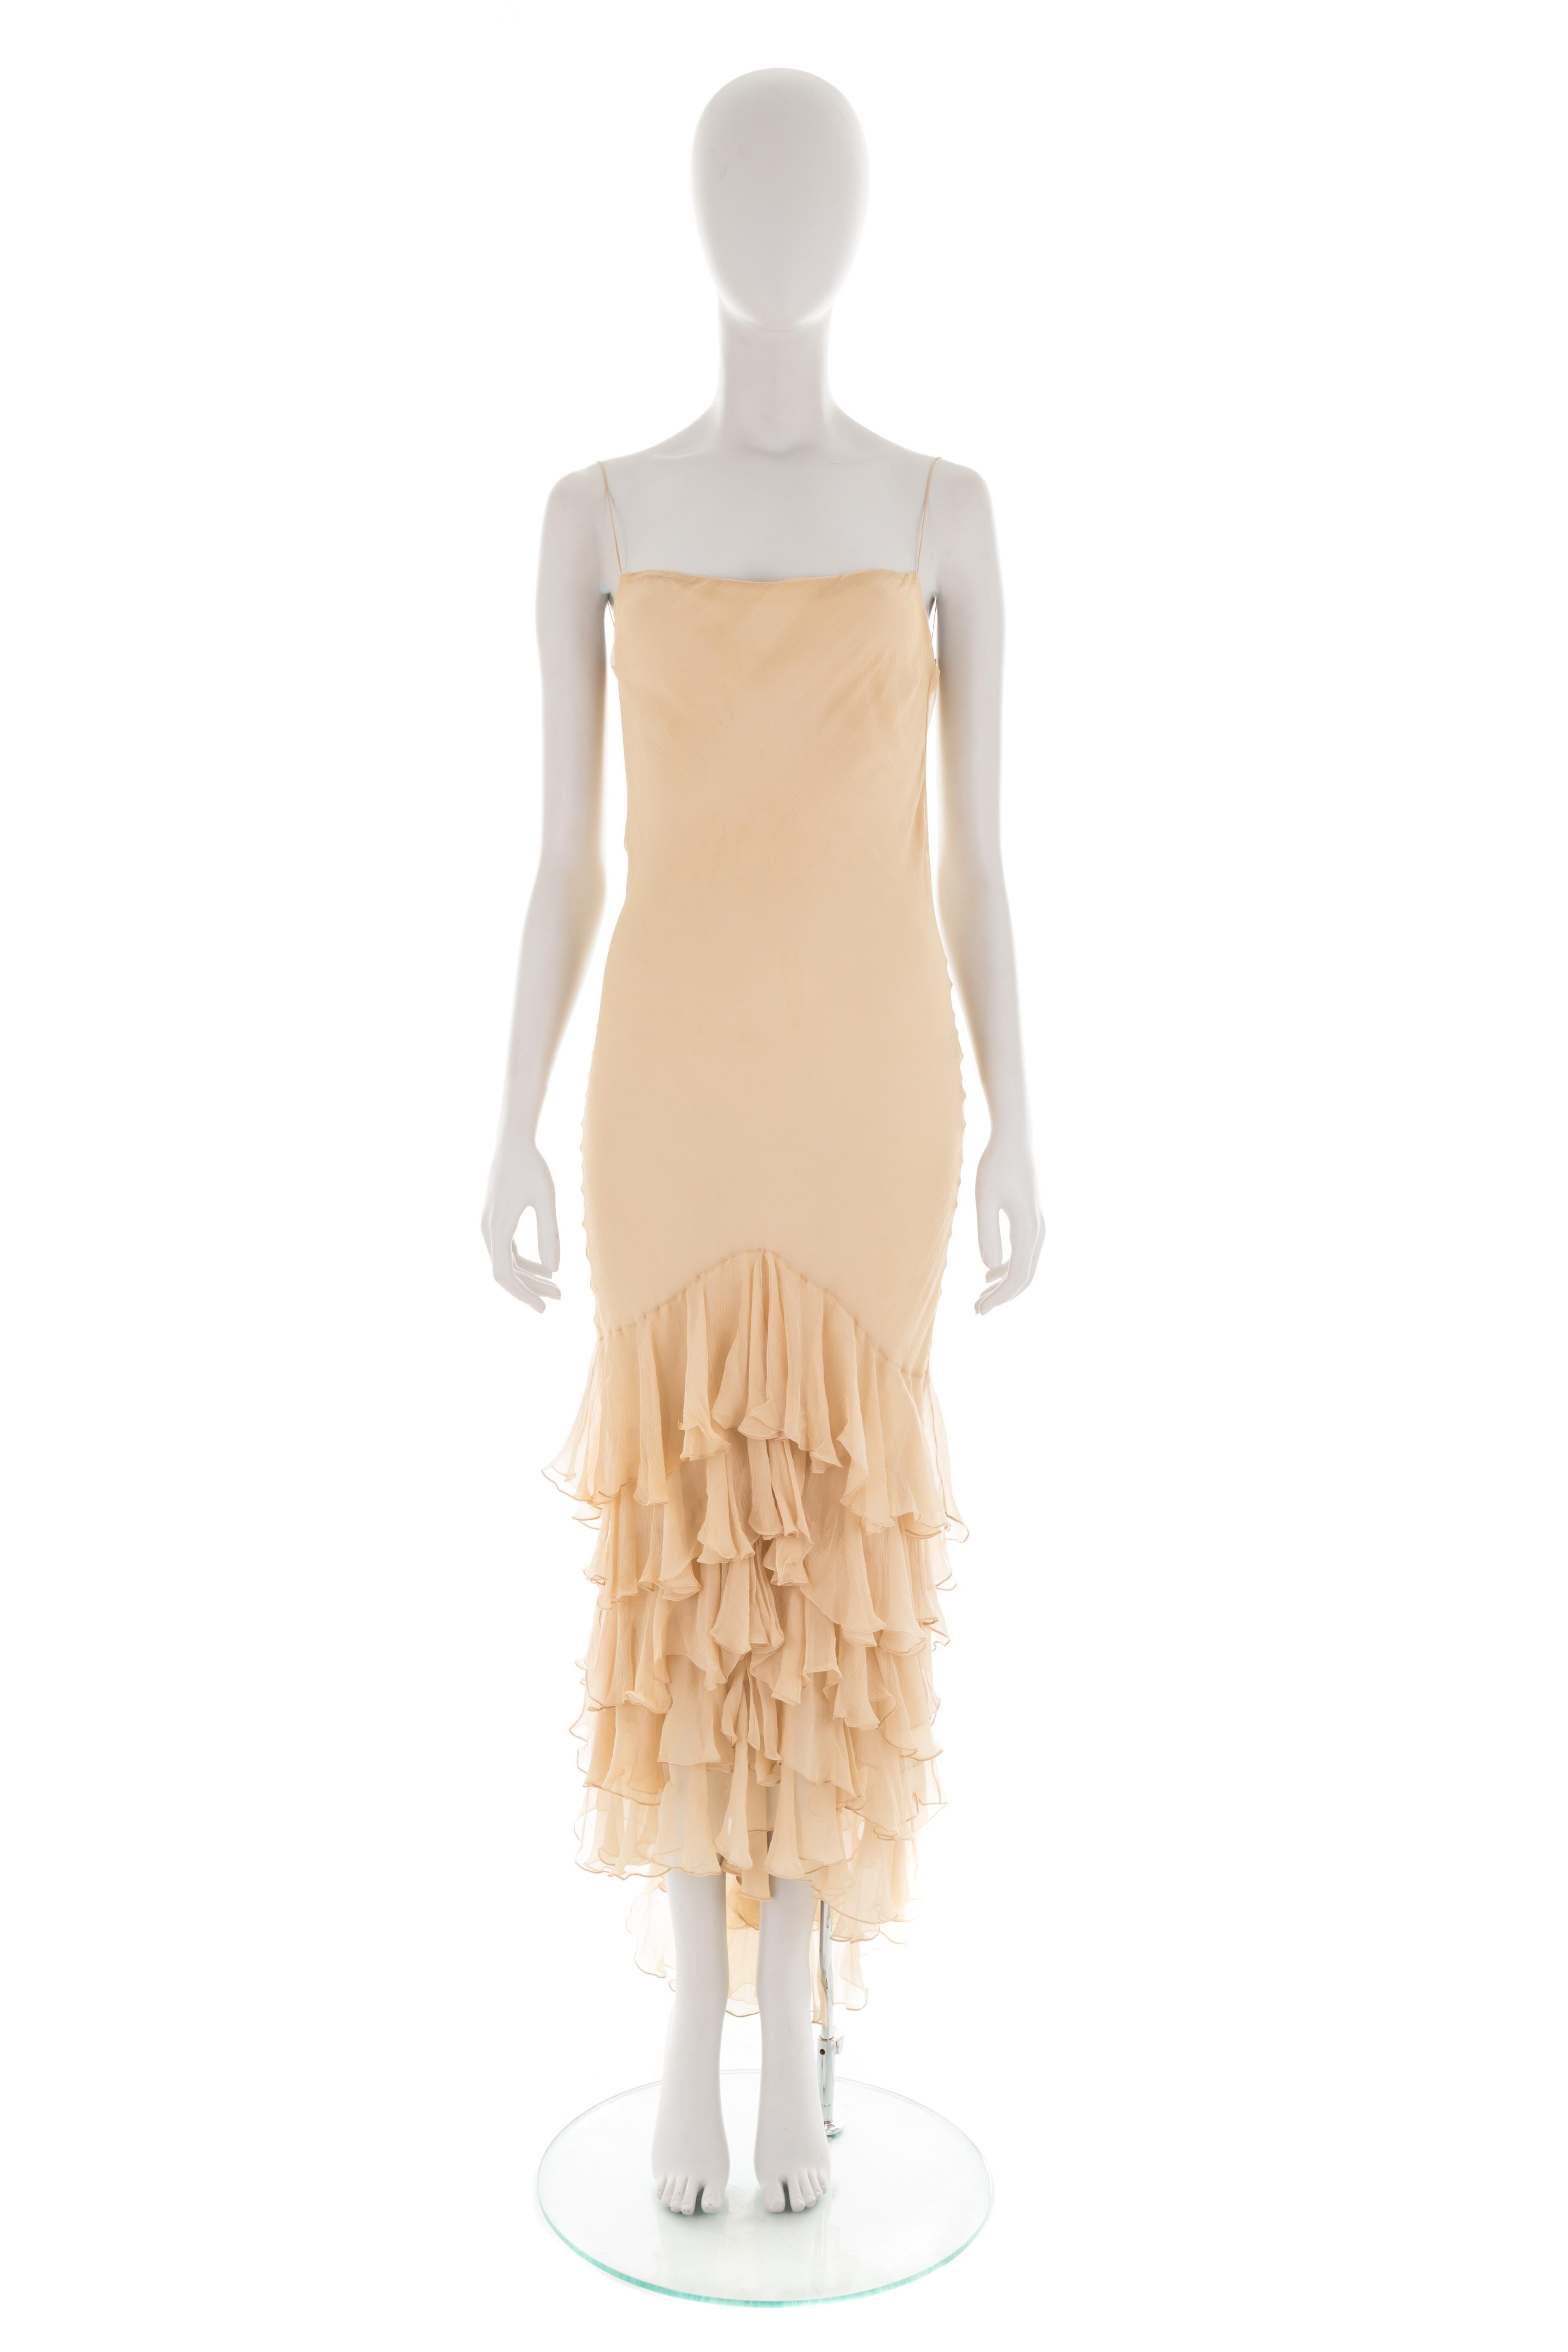 - Ralph Lauren spring-summer 2005 collection 
- Sold by Gold Palms Vintage
- Spaghetti straps
- Square neck
- Asymmetric ruffled mermaid tail
- Few stains on the ruffles, not visible when worn (reflected on the price) 
- Side zipper
- Size: US 4